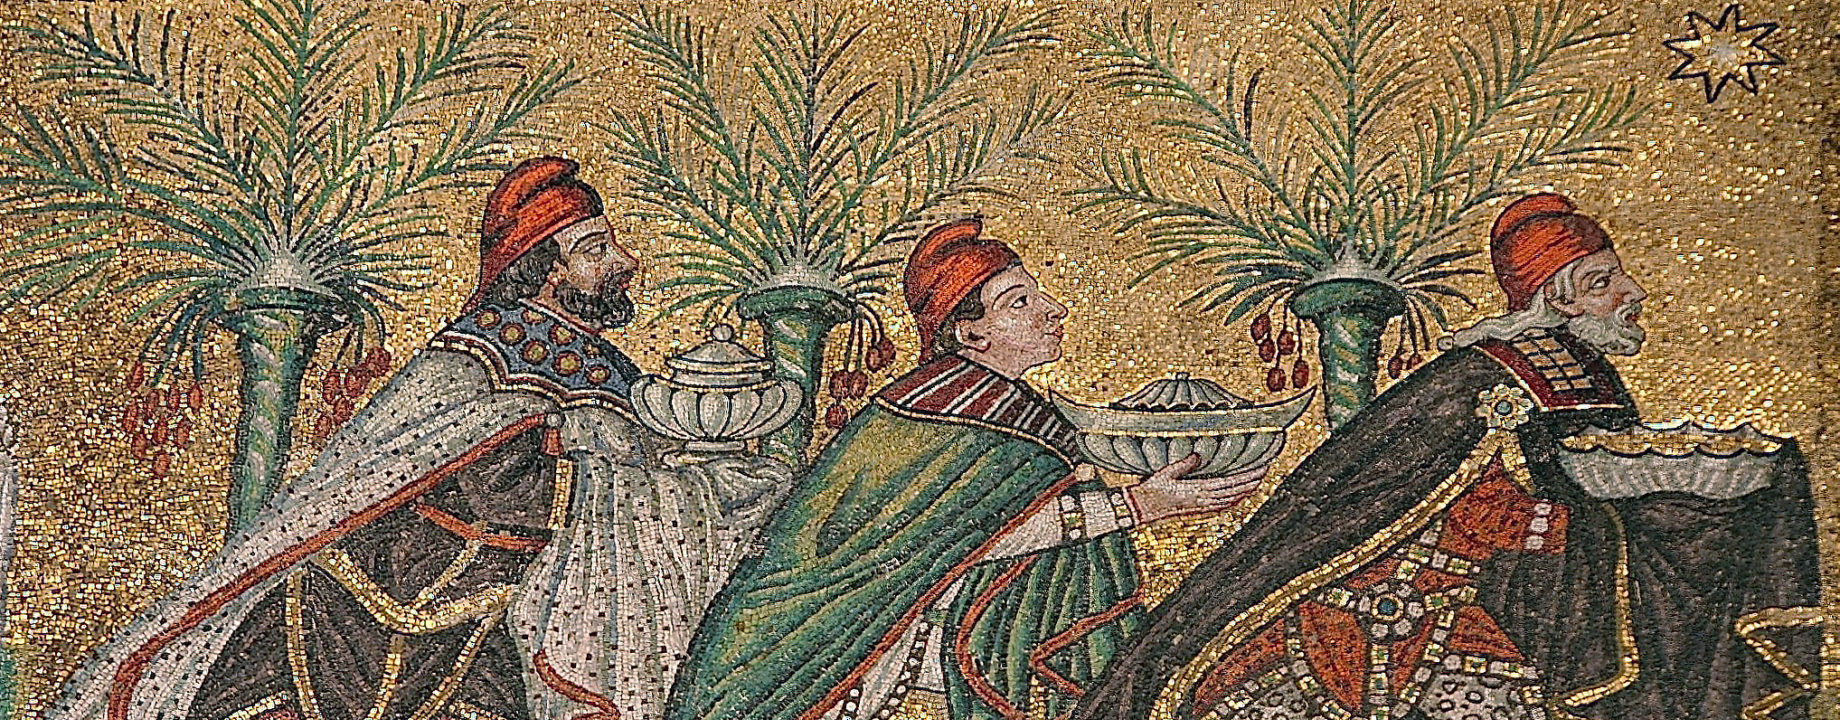 The Three Magi Balthasar Melchior and Gaspar from a late 6th century mosaic at the Basilica of Sant Apollinare Nuovo in Ravenna Italy